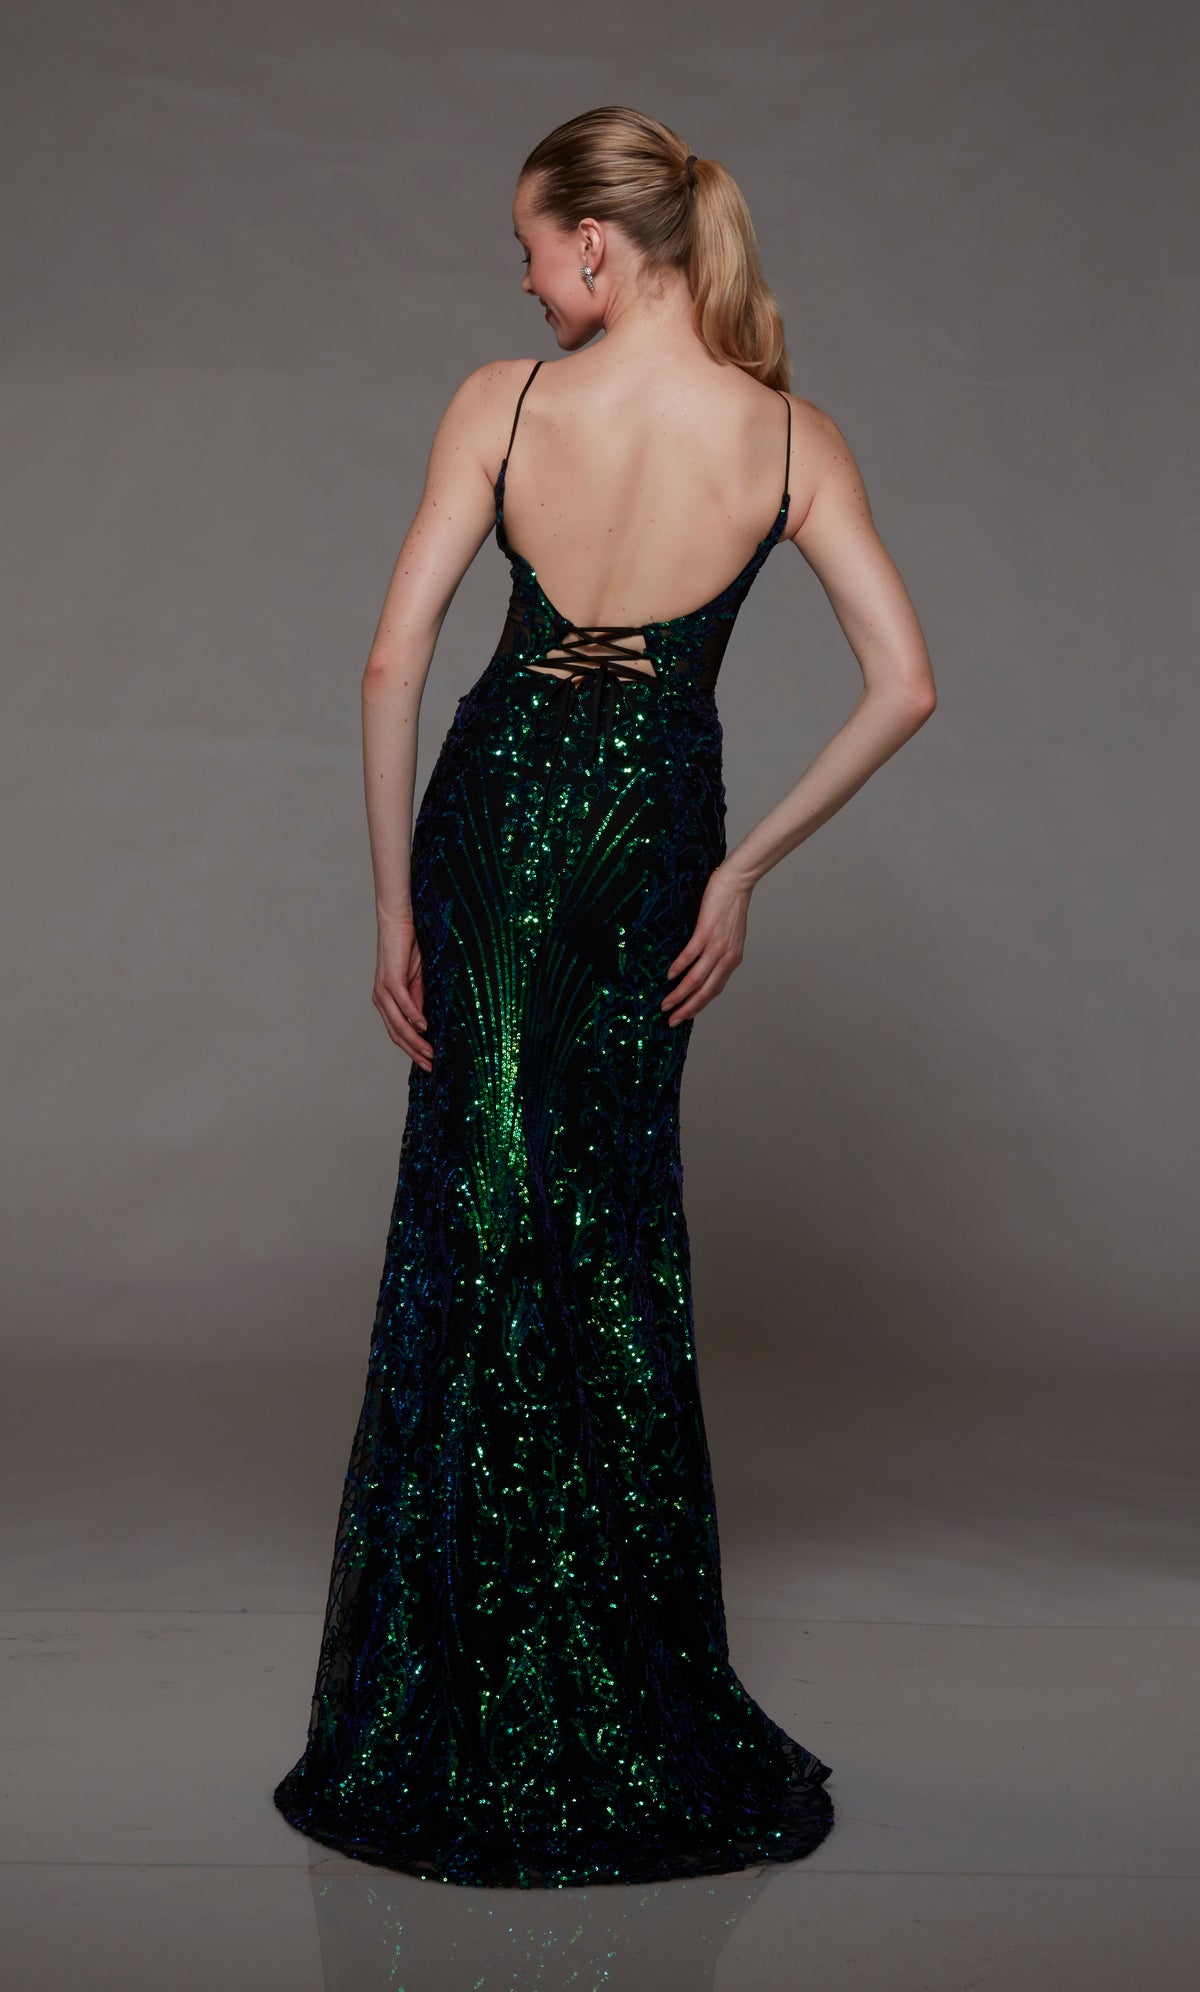 Dark green sequin formal gown: plunging neckline, front slit, lace-up back, slight train. A stunning choice for an elegant and glamorous occasion.